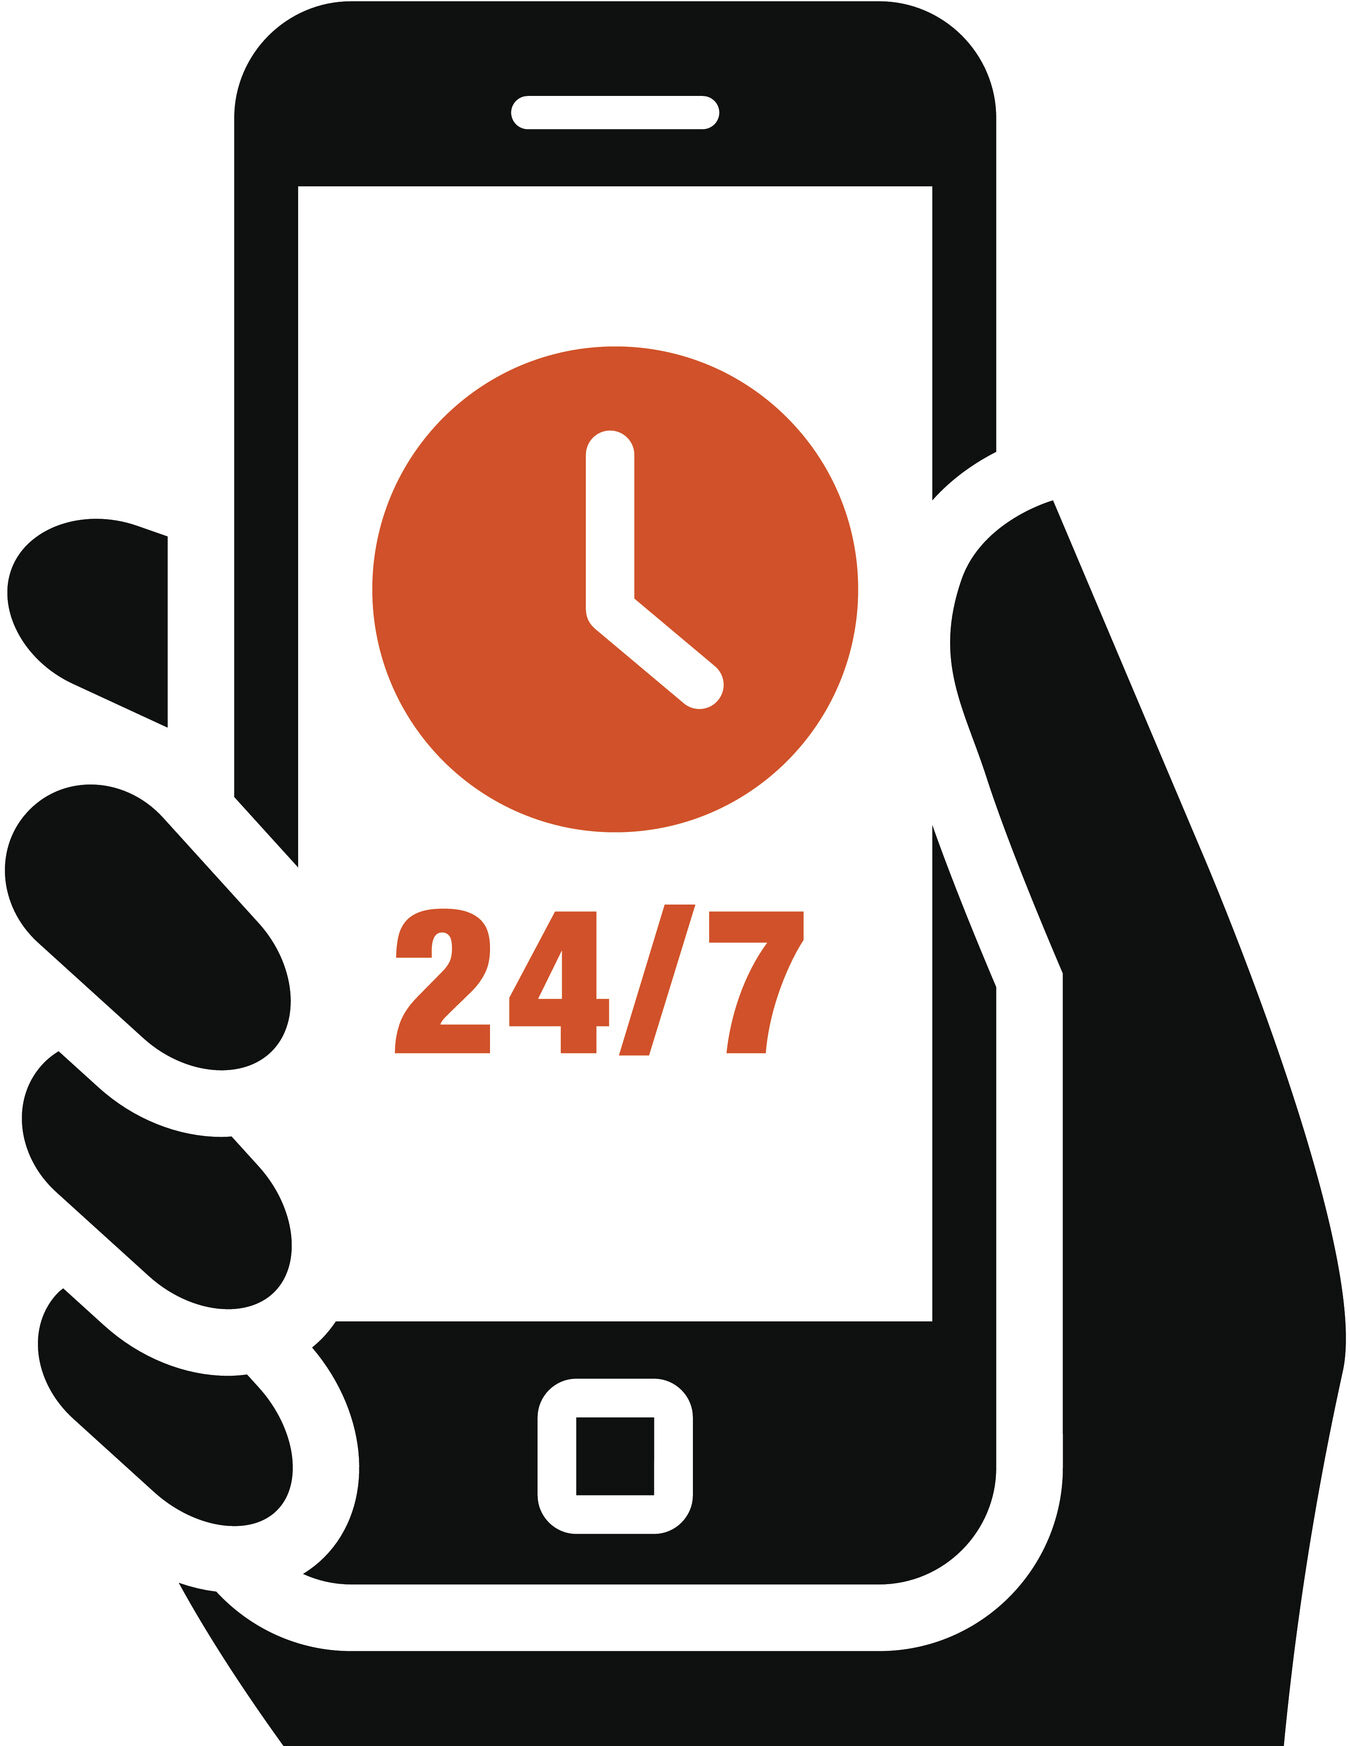 Mobile phone in hand with a clock icon and 24/7 service in Terrell, TX.